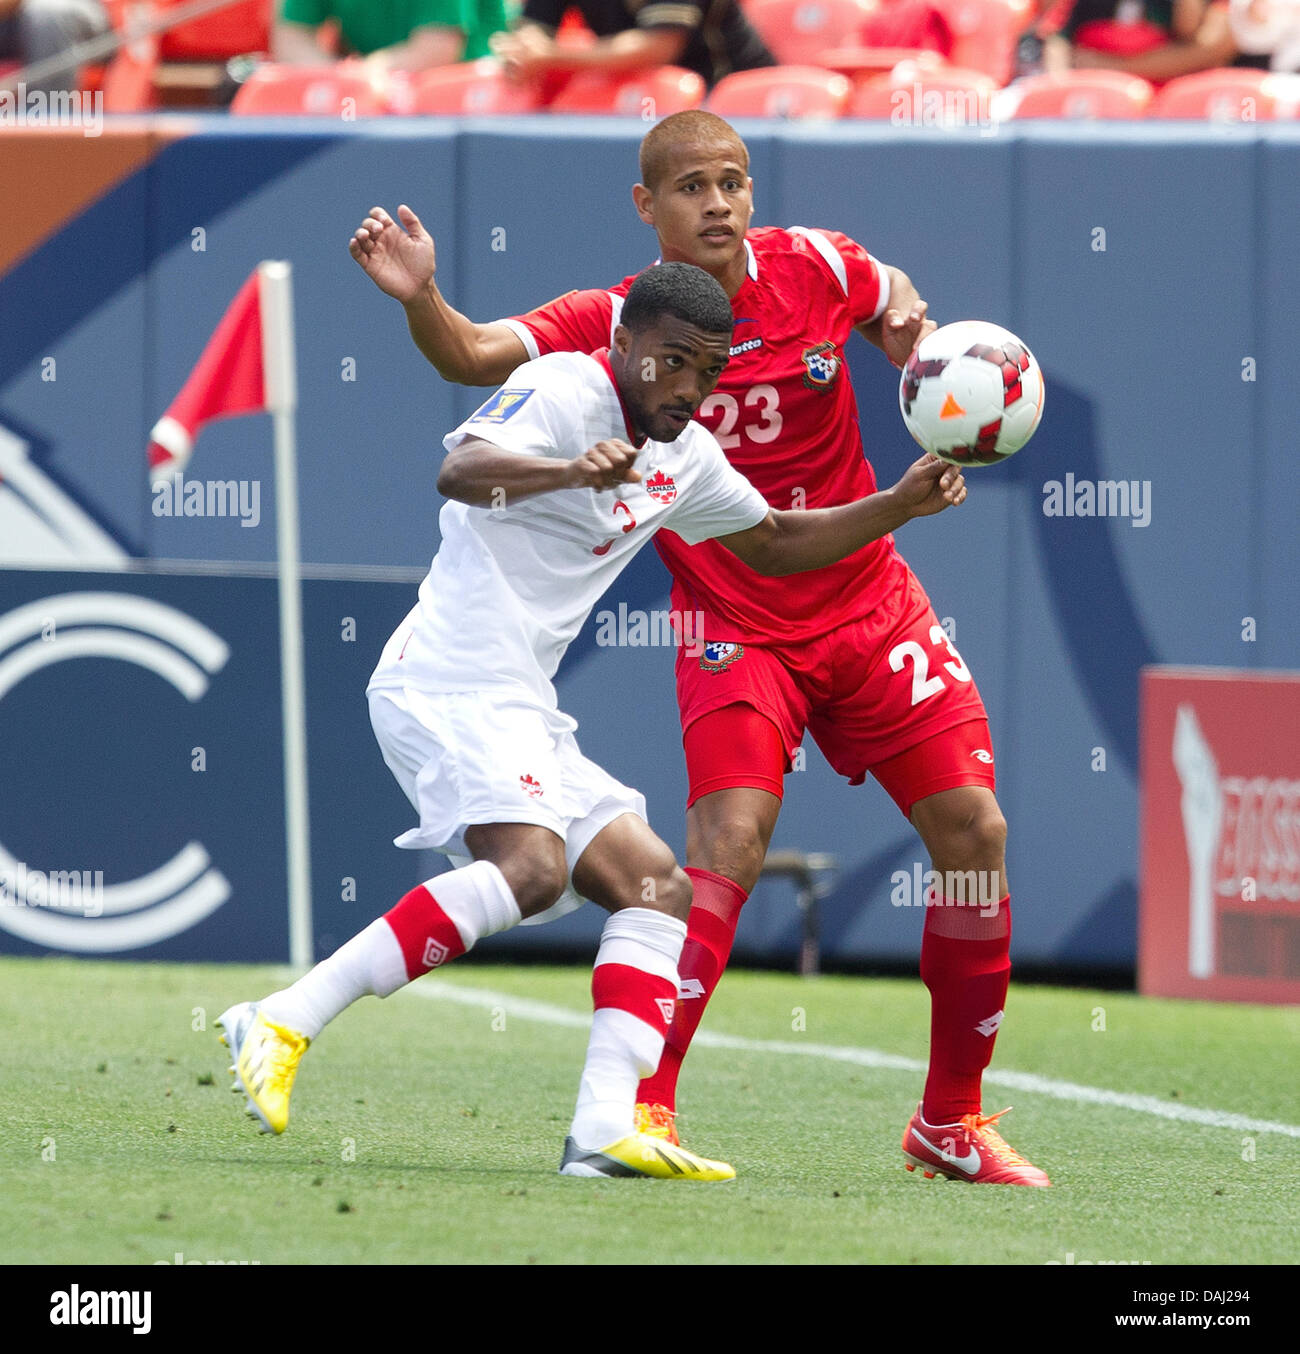 Commerce City, Colorado, USA. 14th July, 2013. MORGAN ASHTONE, left, of Canada battles for control of the ball with Panama's CHEN OBERTO, right, during the 2nd. half at Sports Autority Field at Mile High Sunday afternoon. Canada and Panama play to a 0-0 draw. Credit:  Hector Acevedo/ZUMAPRESS.com/Alamy Live News Stock Photo